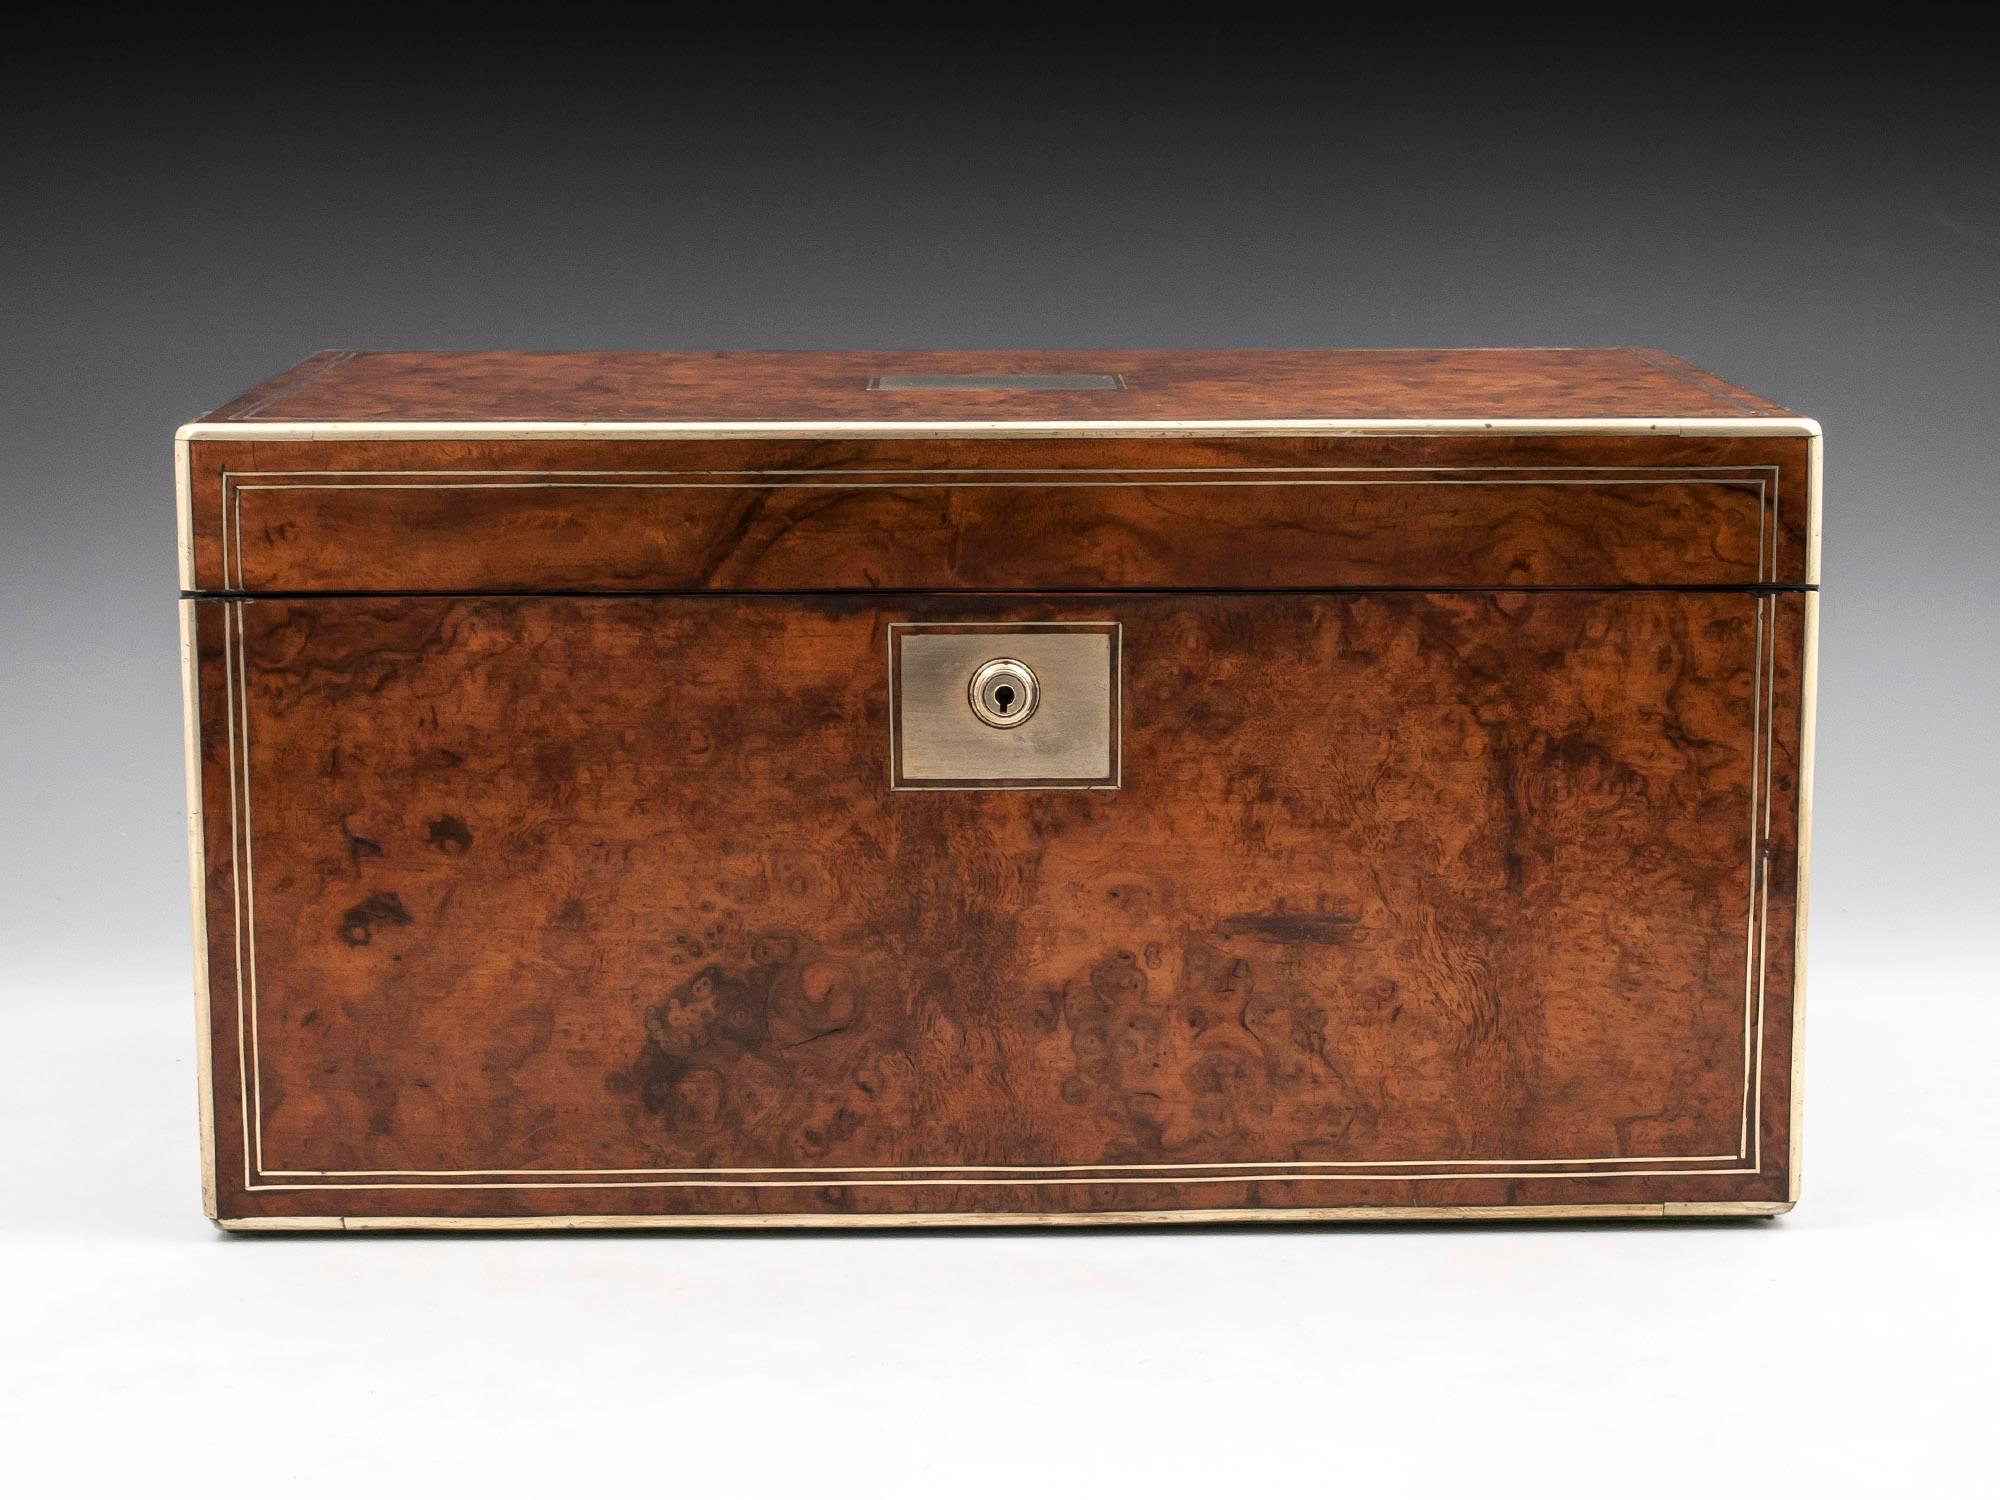 Antique writing box veneered in lovely figured burr walnut with brass edging and double stringing, with a large vacant brass initial plate on the top and matching lock escutcheon, contains two secret compartments one with three drawers and another